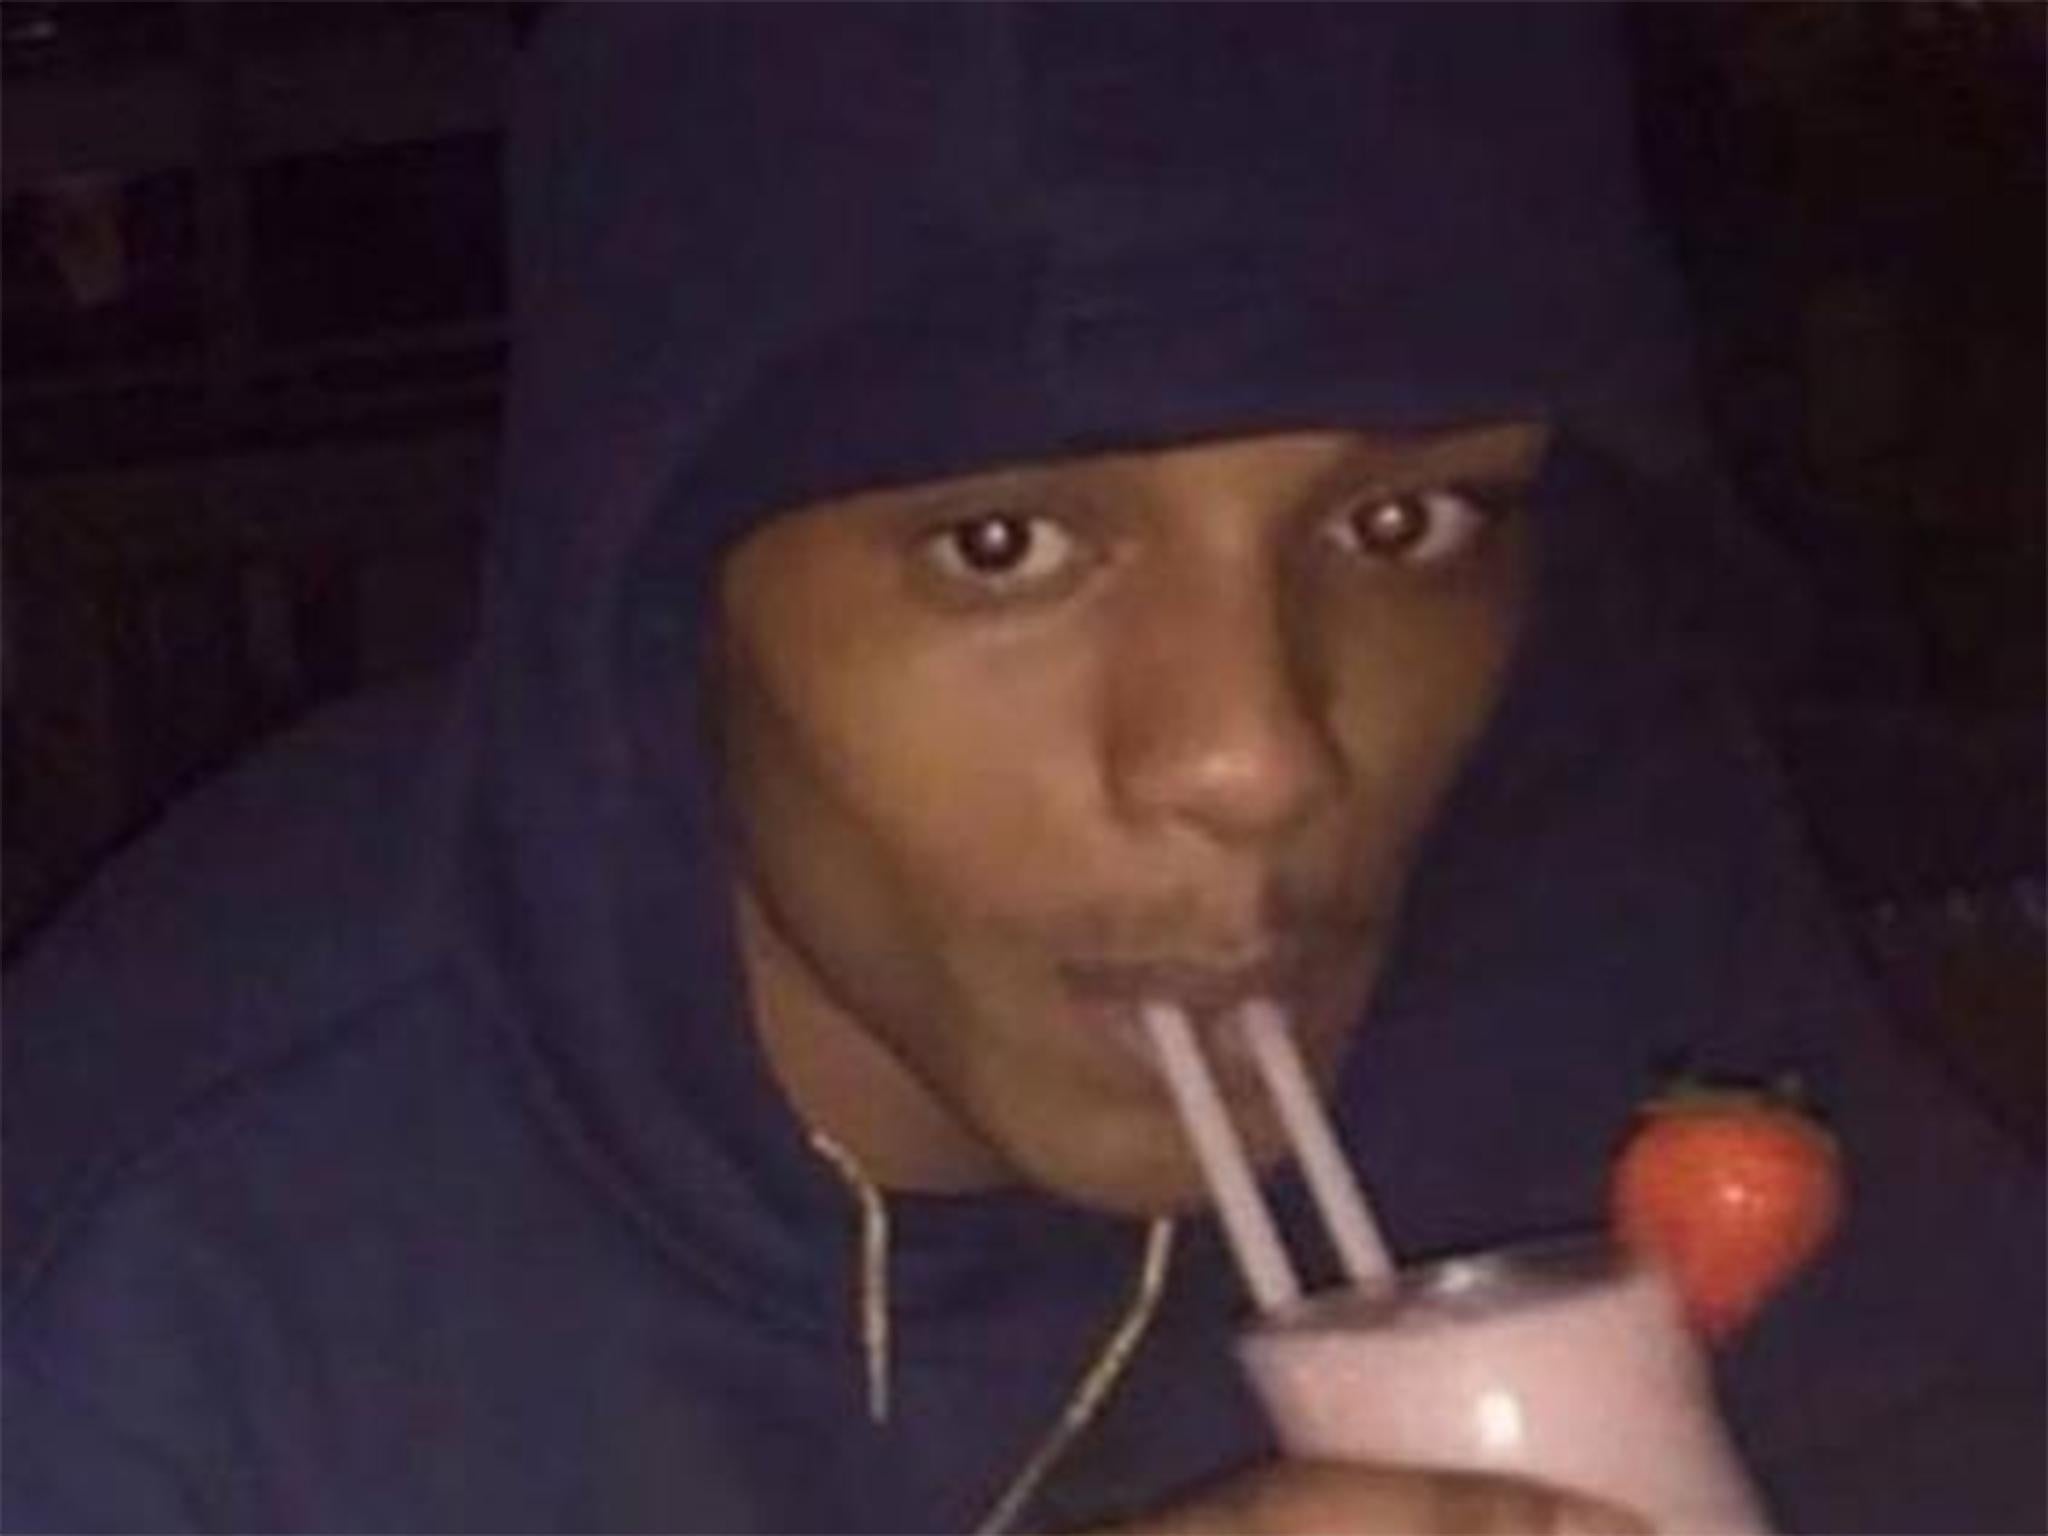 Rashan Charles died in July last year after being chased into a shop in Hackney where CCTV showed an Met Police officer struggling with him on the floor